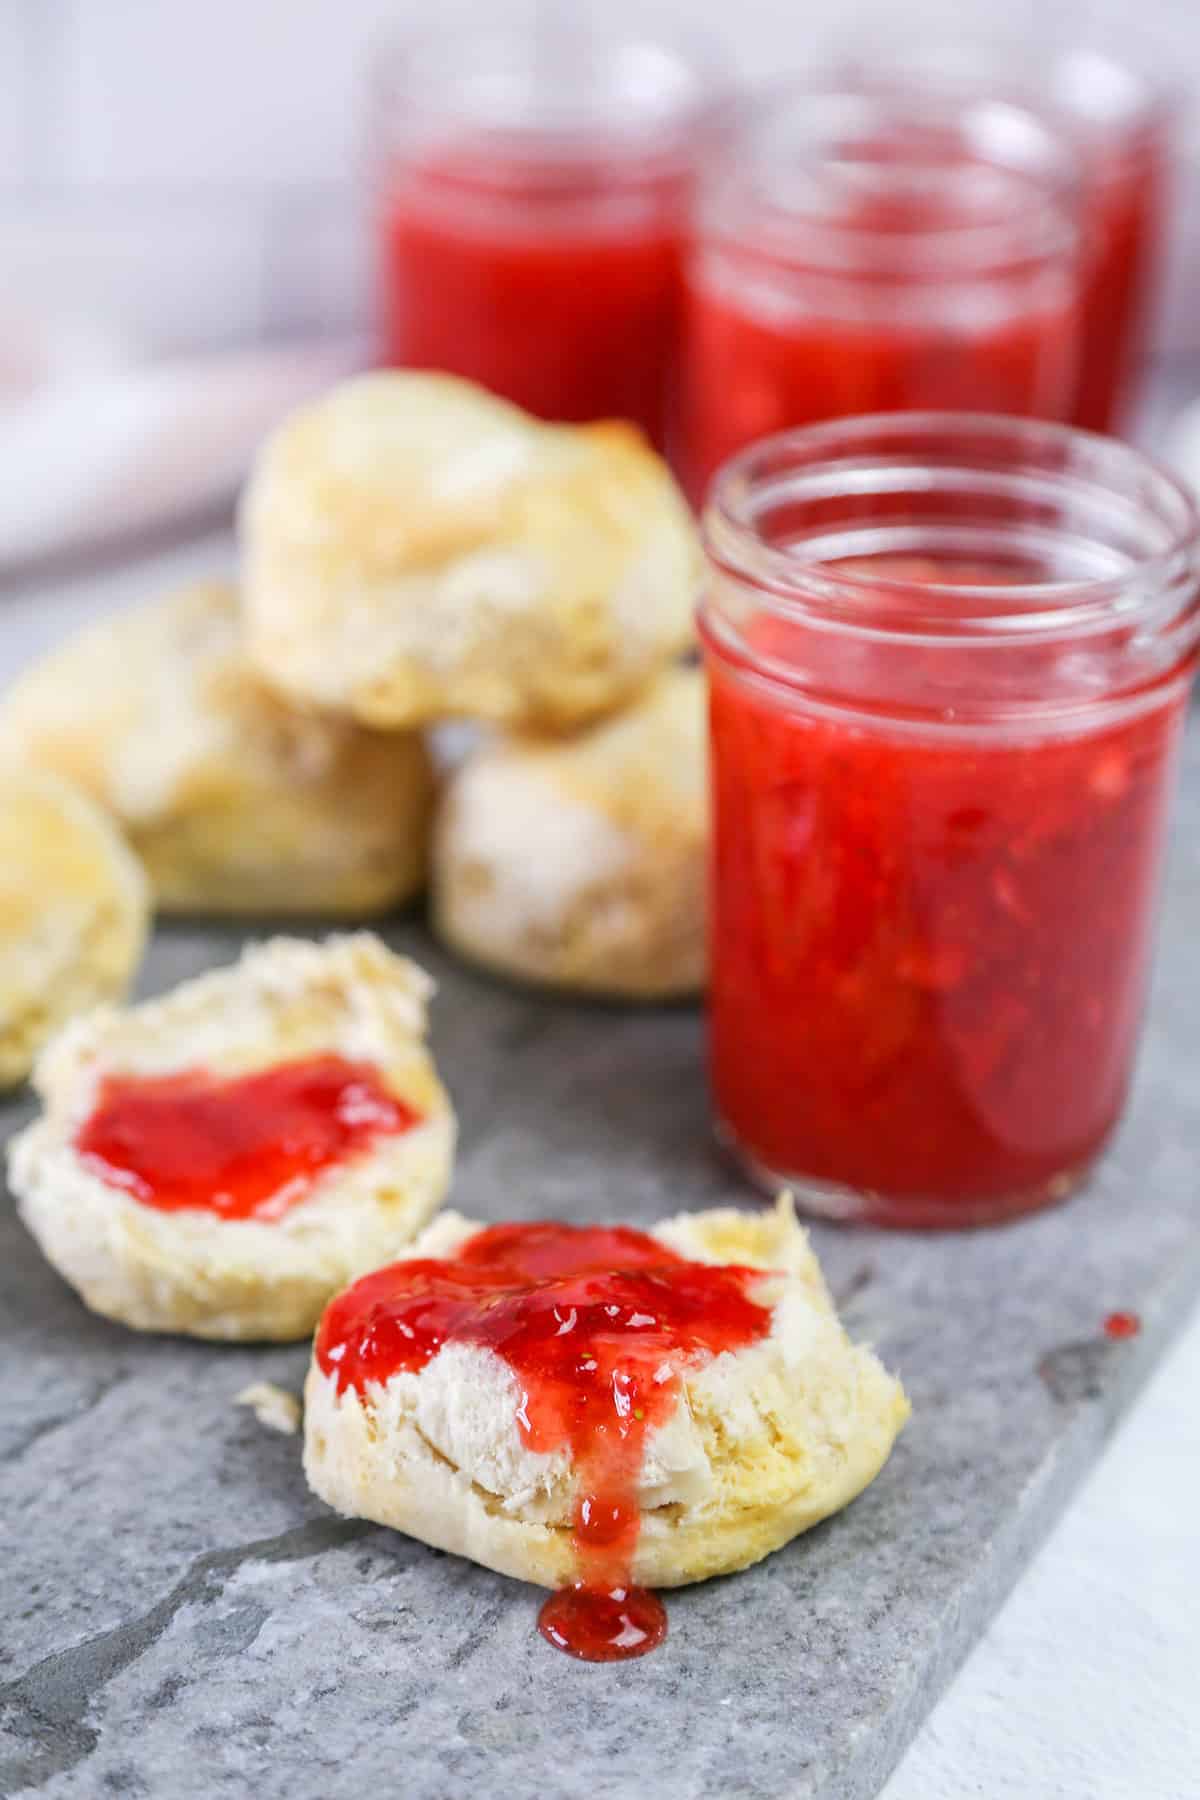 Strawberry freezer jam on biscuit halves with more biscuits and jelly jars stacked in the background.